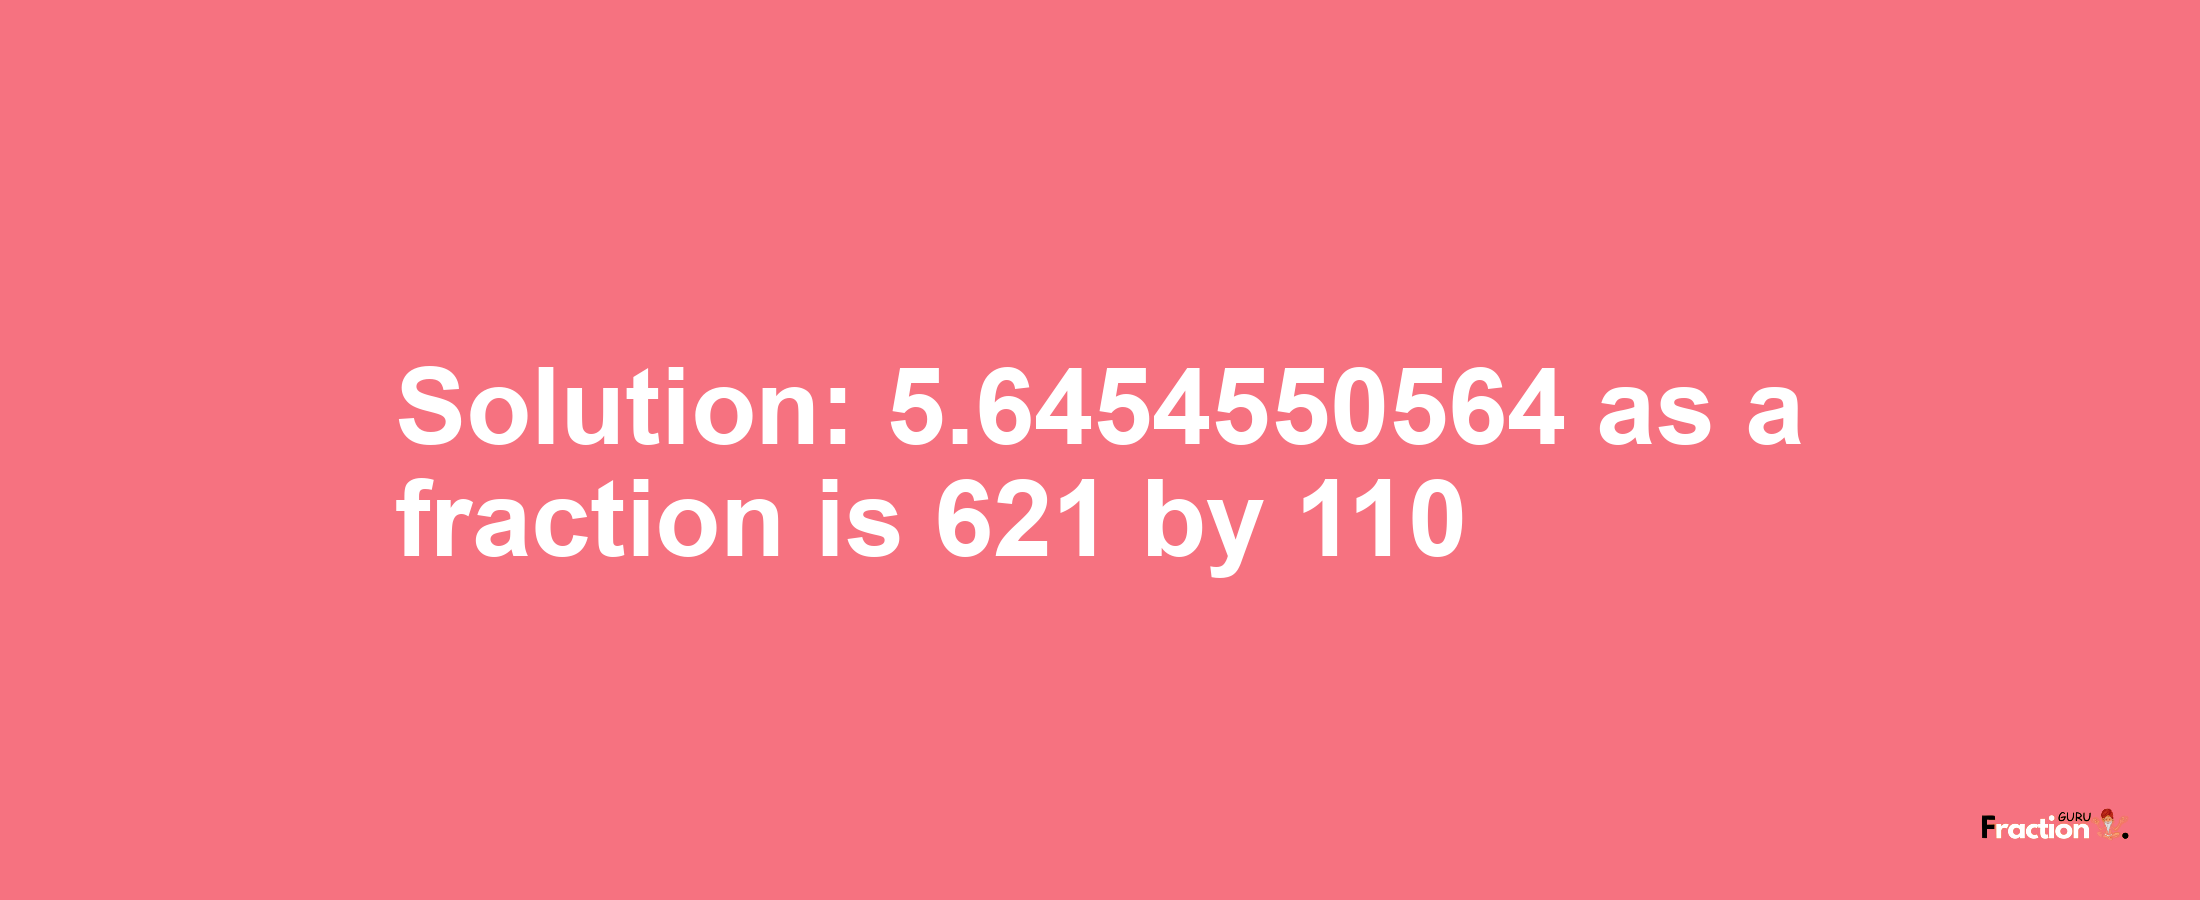 Solution:5.6454550564 as a fraction is 621/110